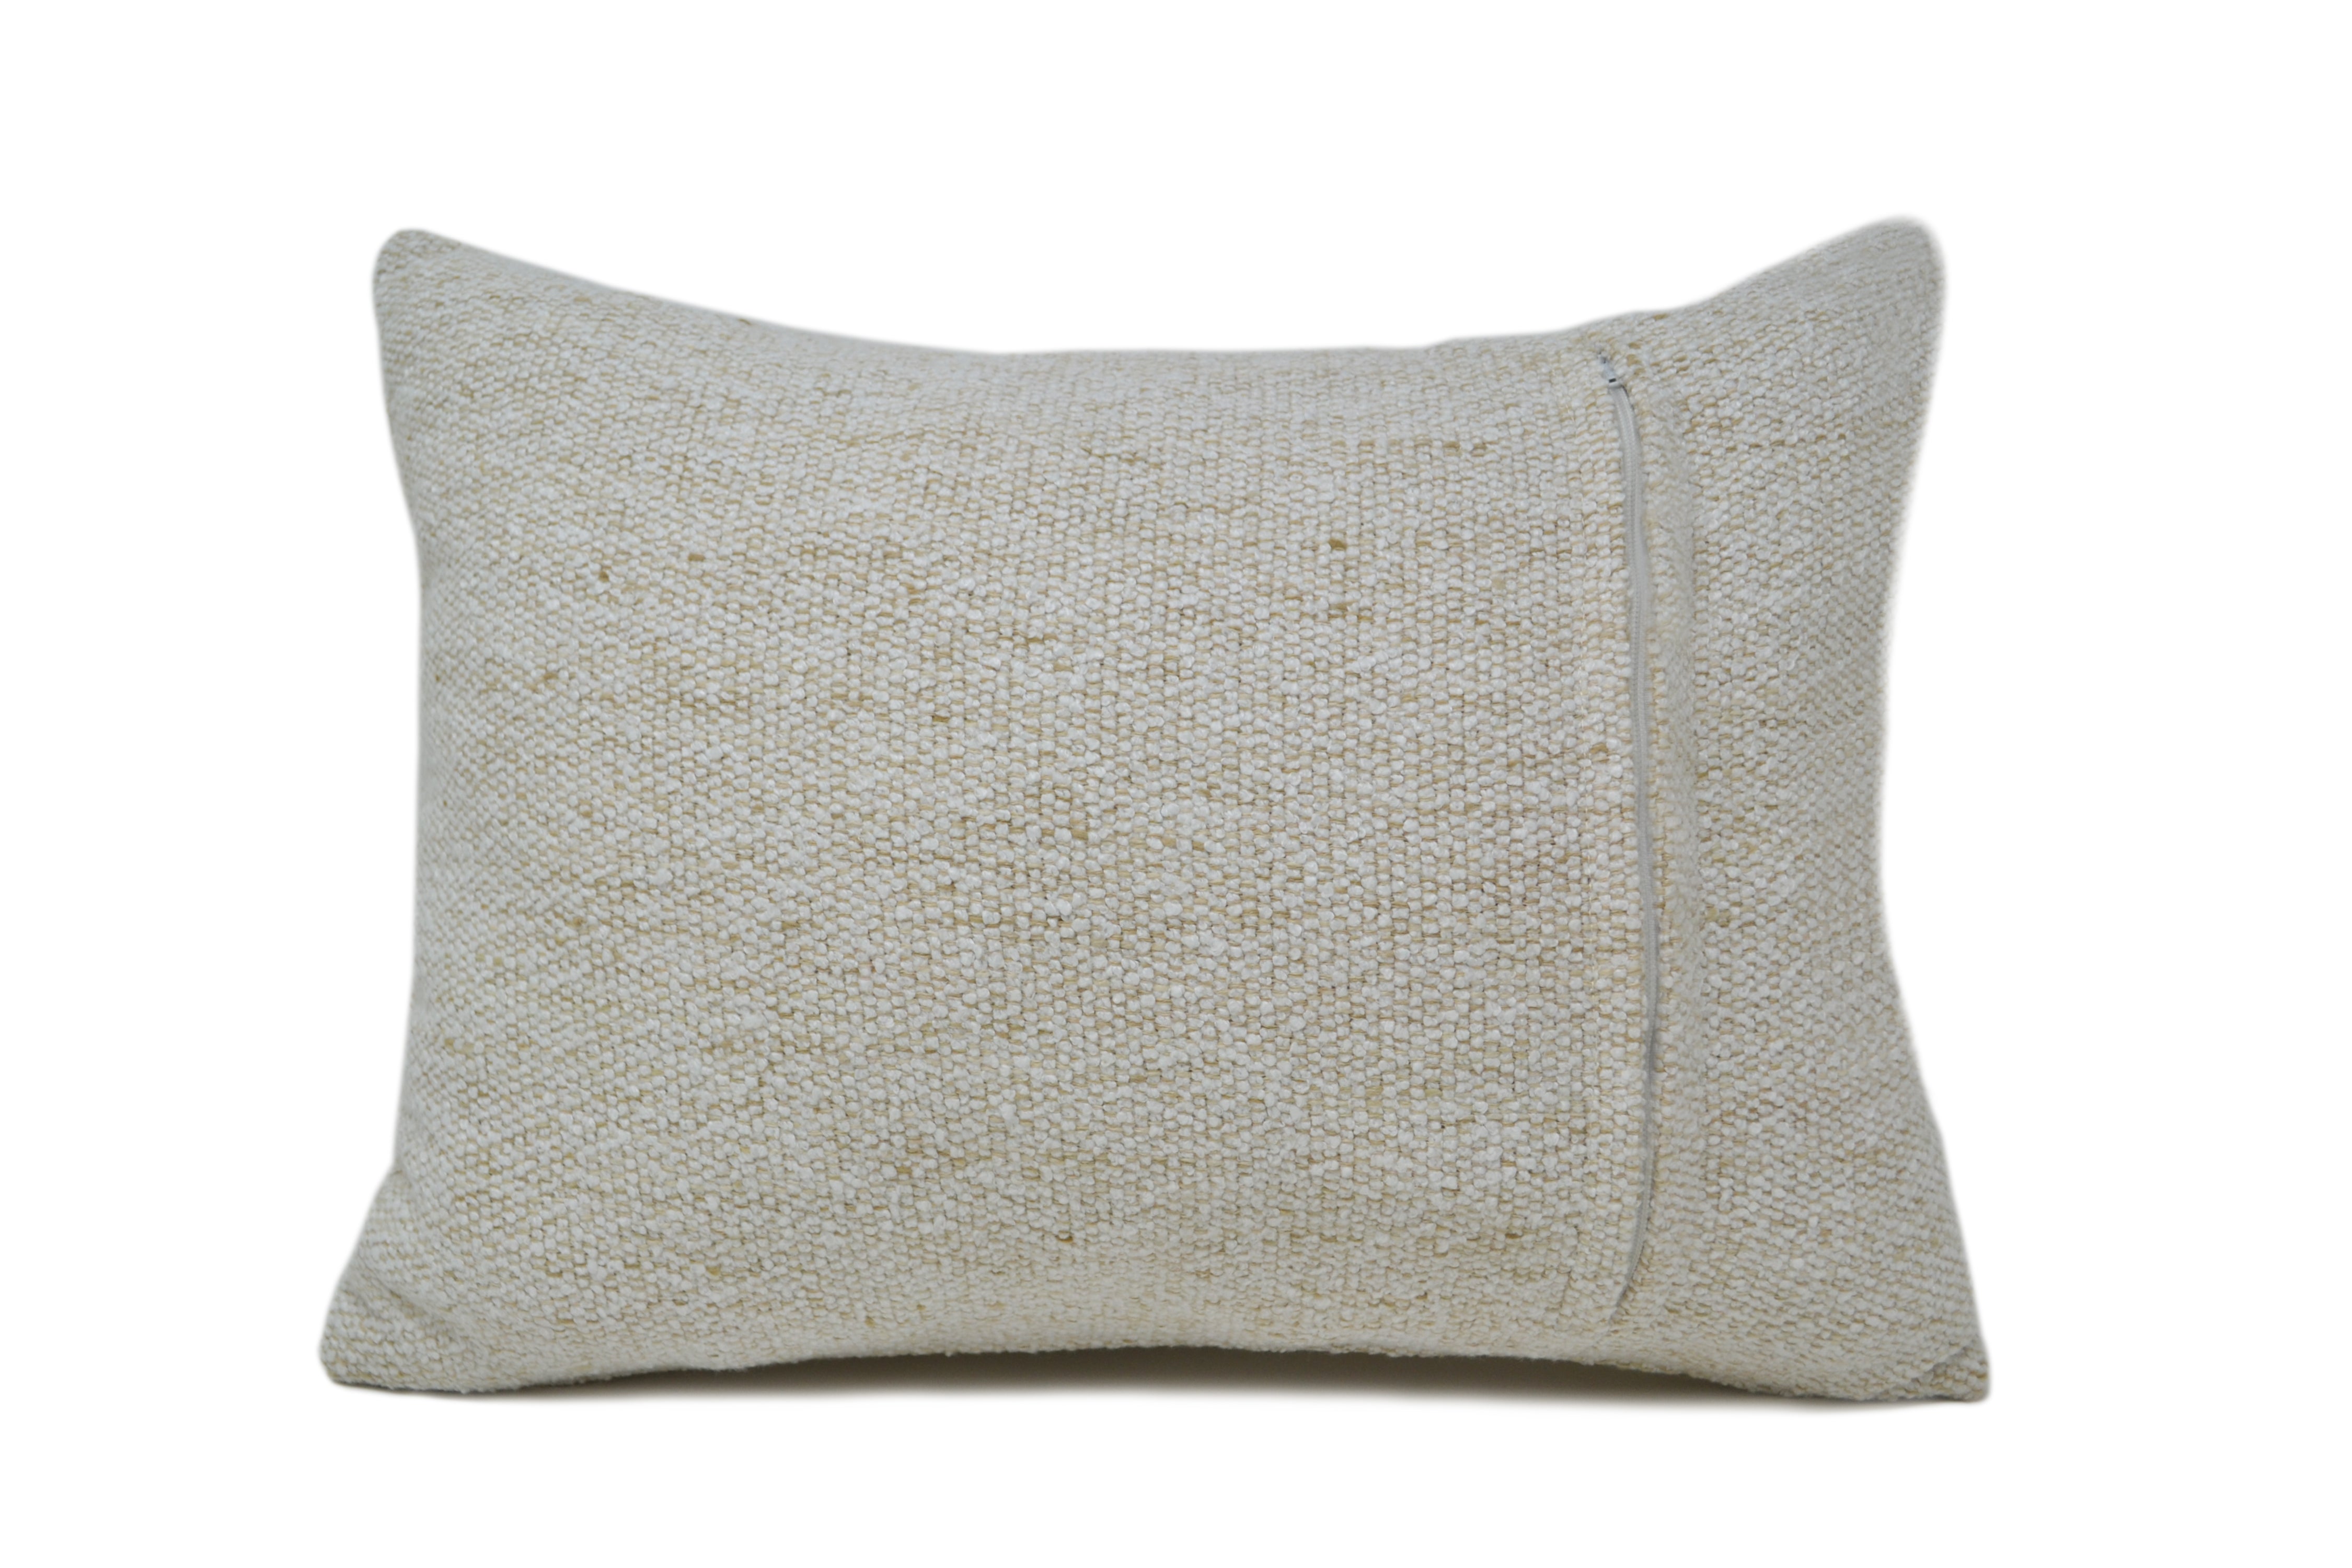 Oatmeal Blouce pillow cover